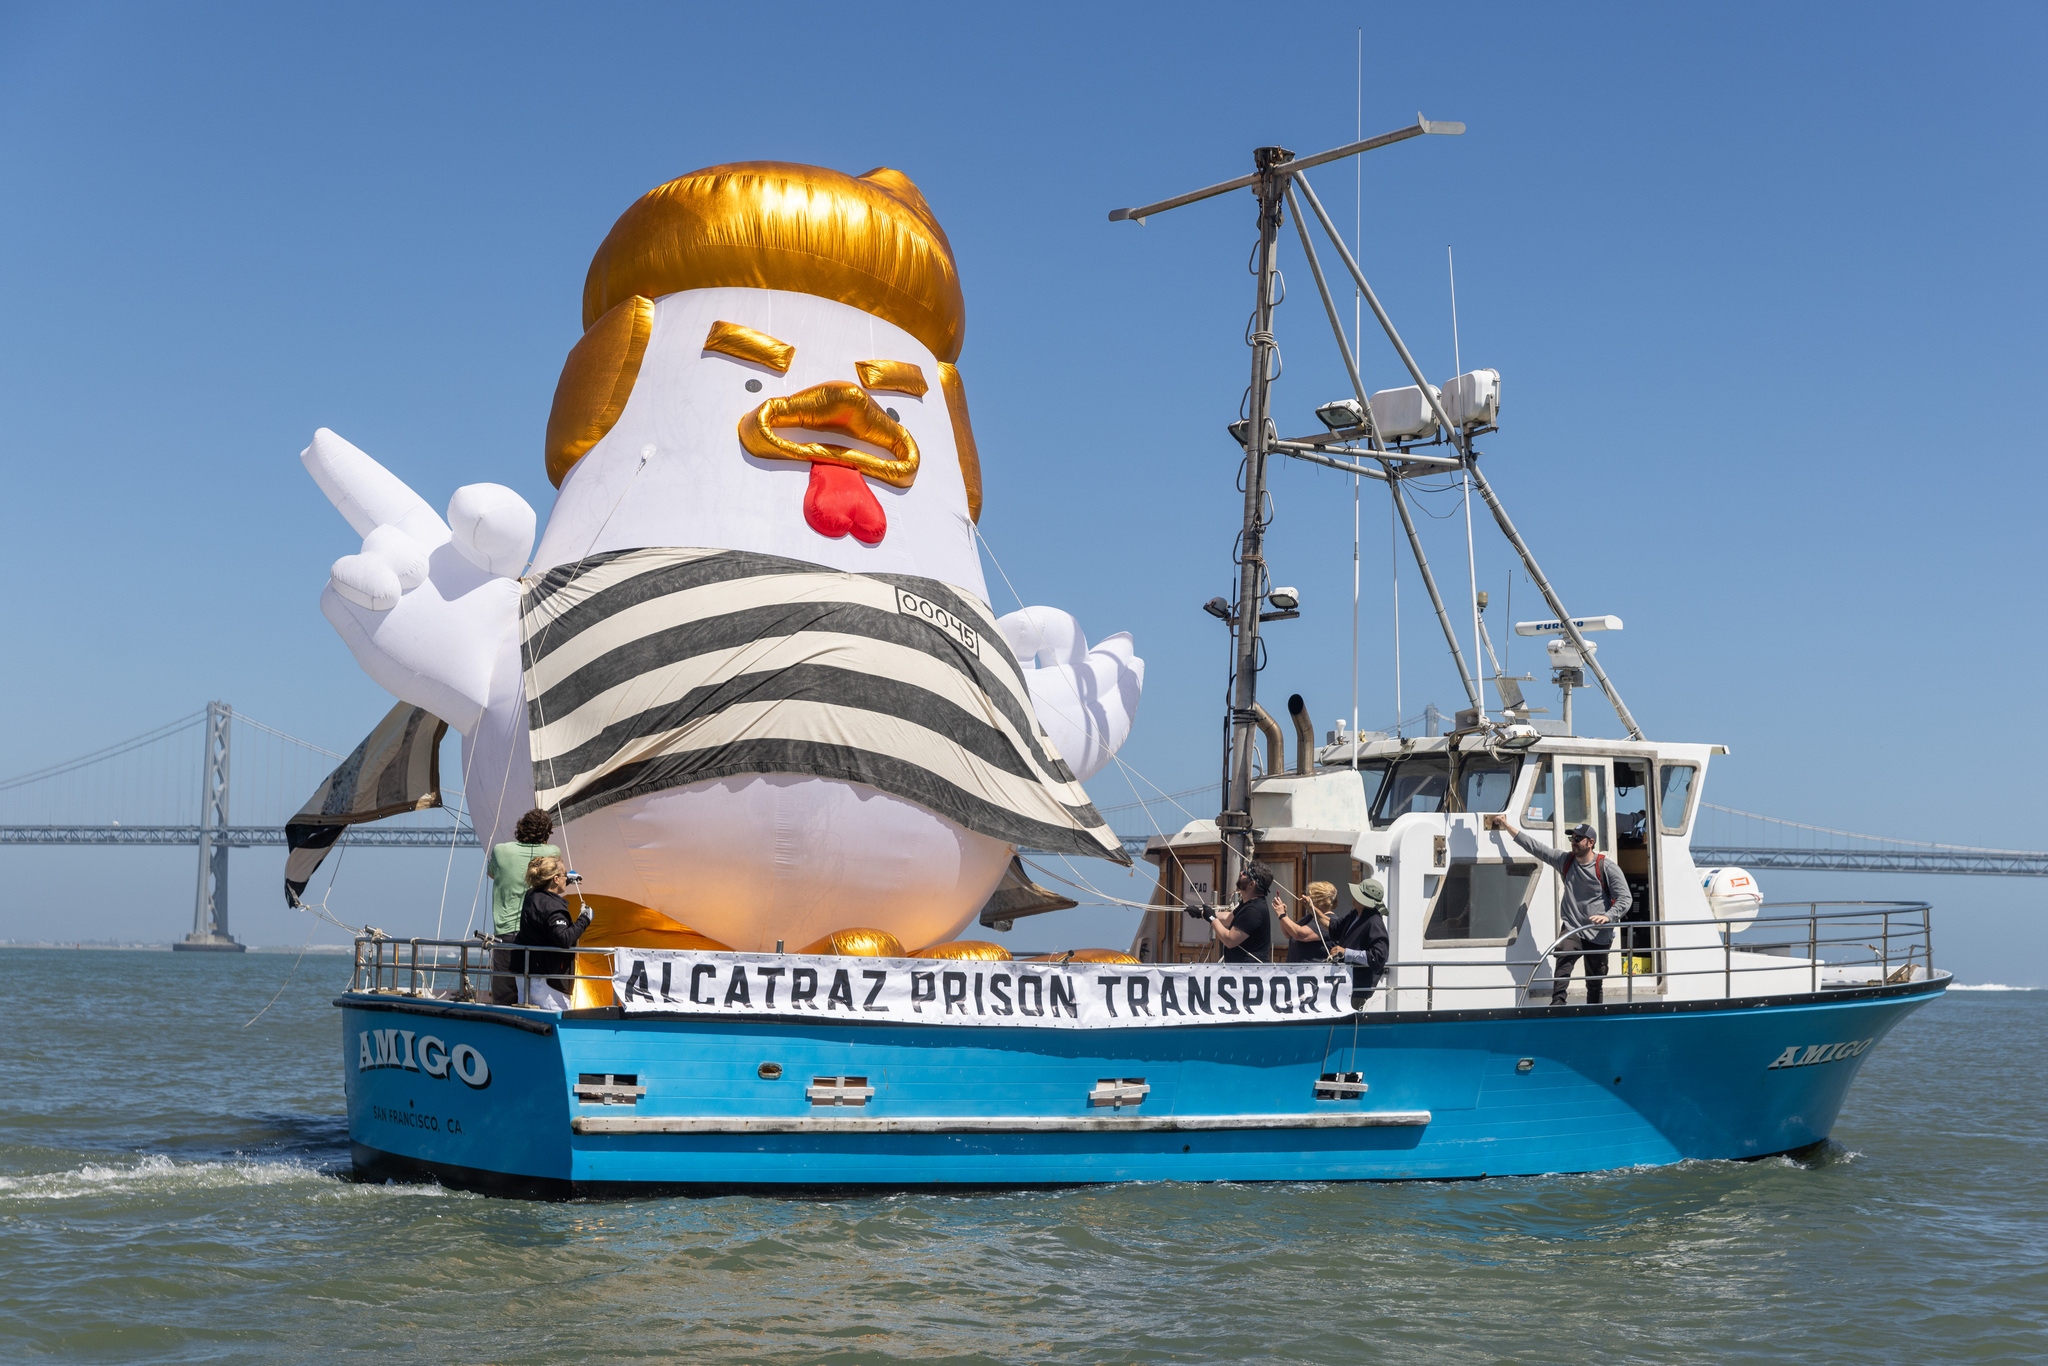 San Francisco Bay: A Divided City - Trump's Fundraiser and the Giant Inflatable Chicken Protest